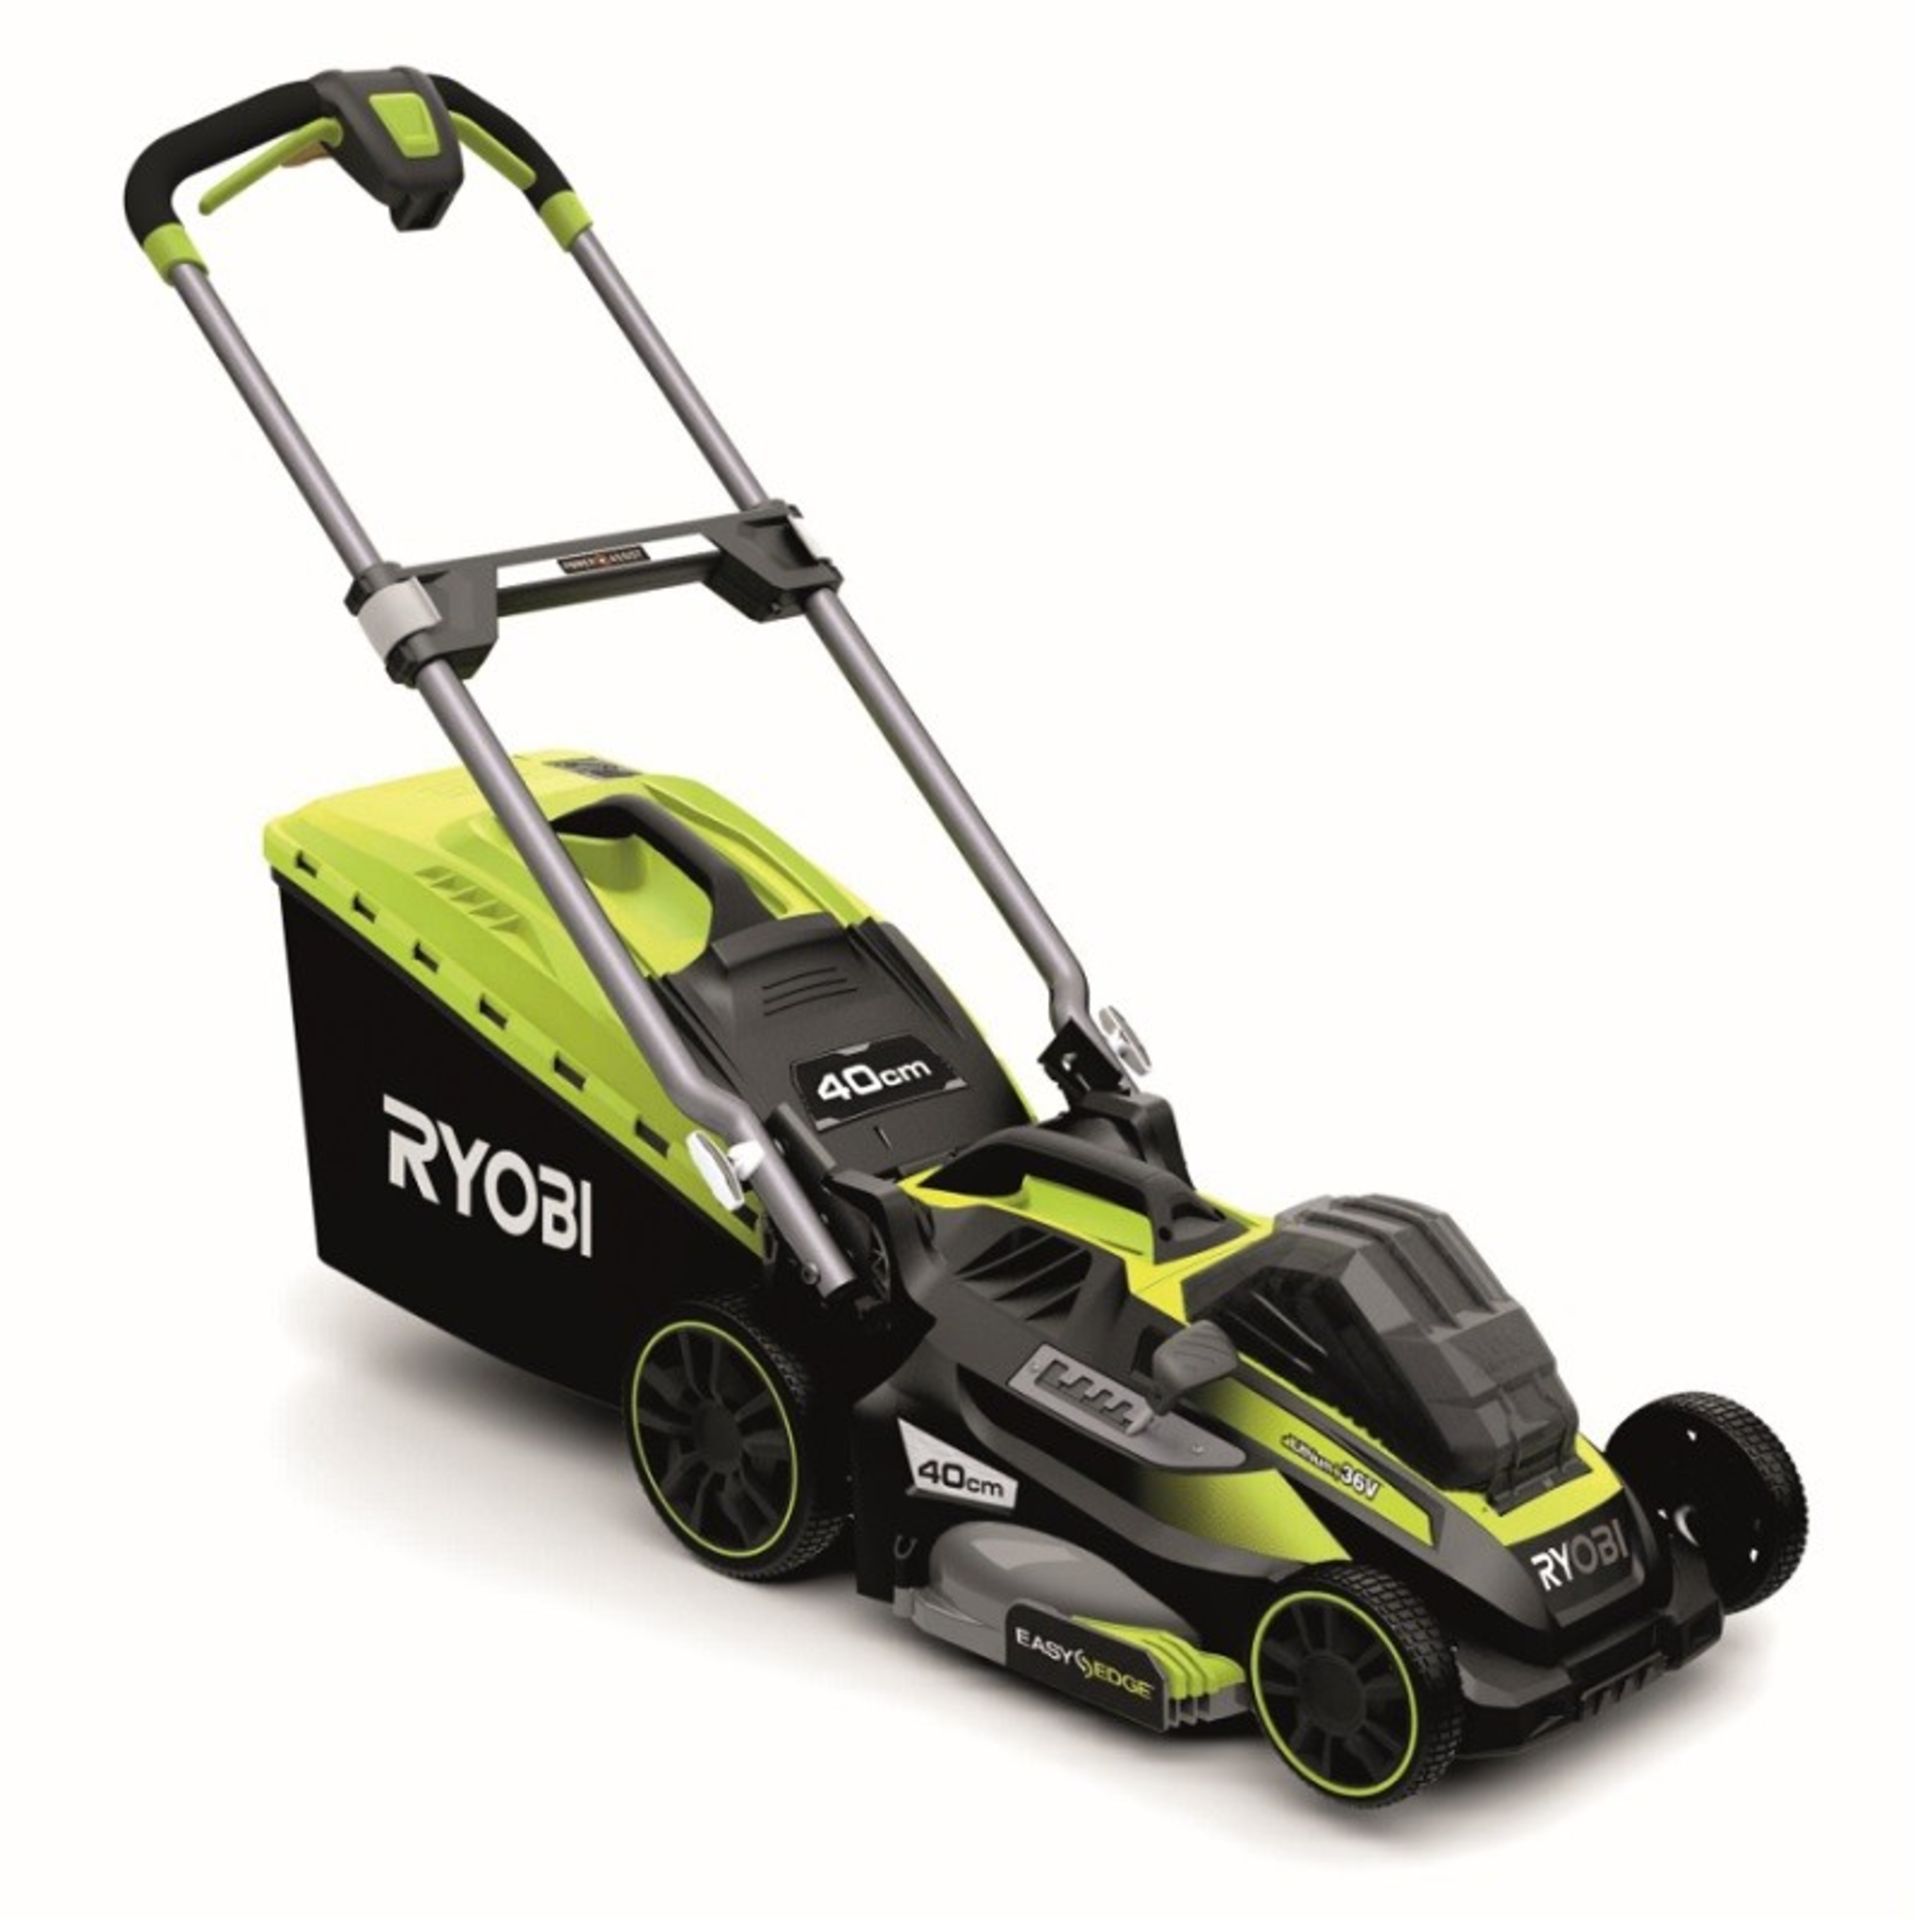 V Brand New Ryobi 36V Cordless Lawn Mower 40cm With 1x 5Ah Battery - Capable Of Mowing Up To 600m2